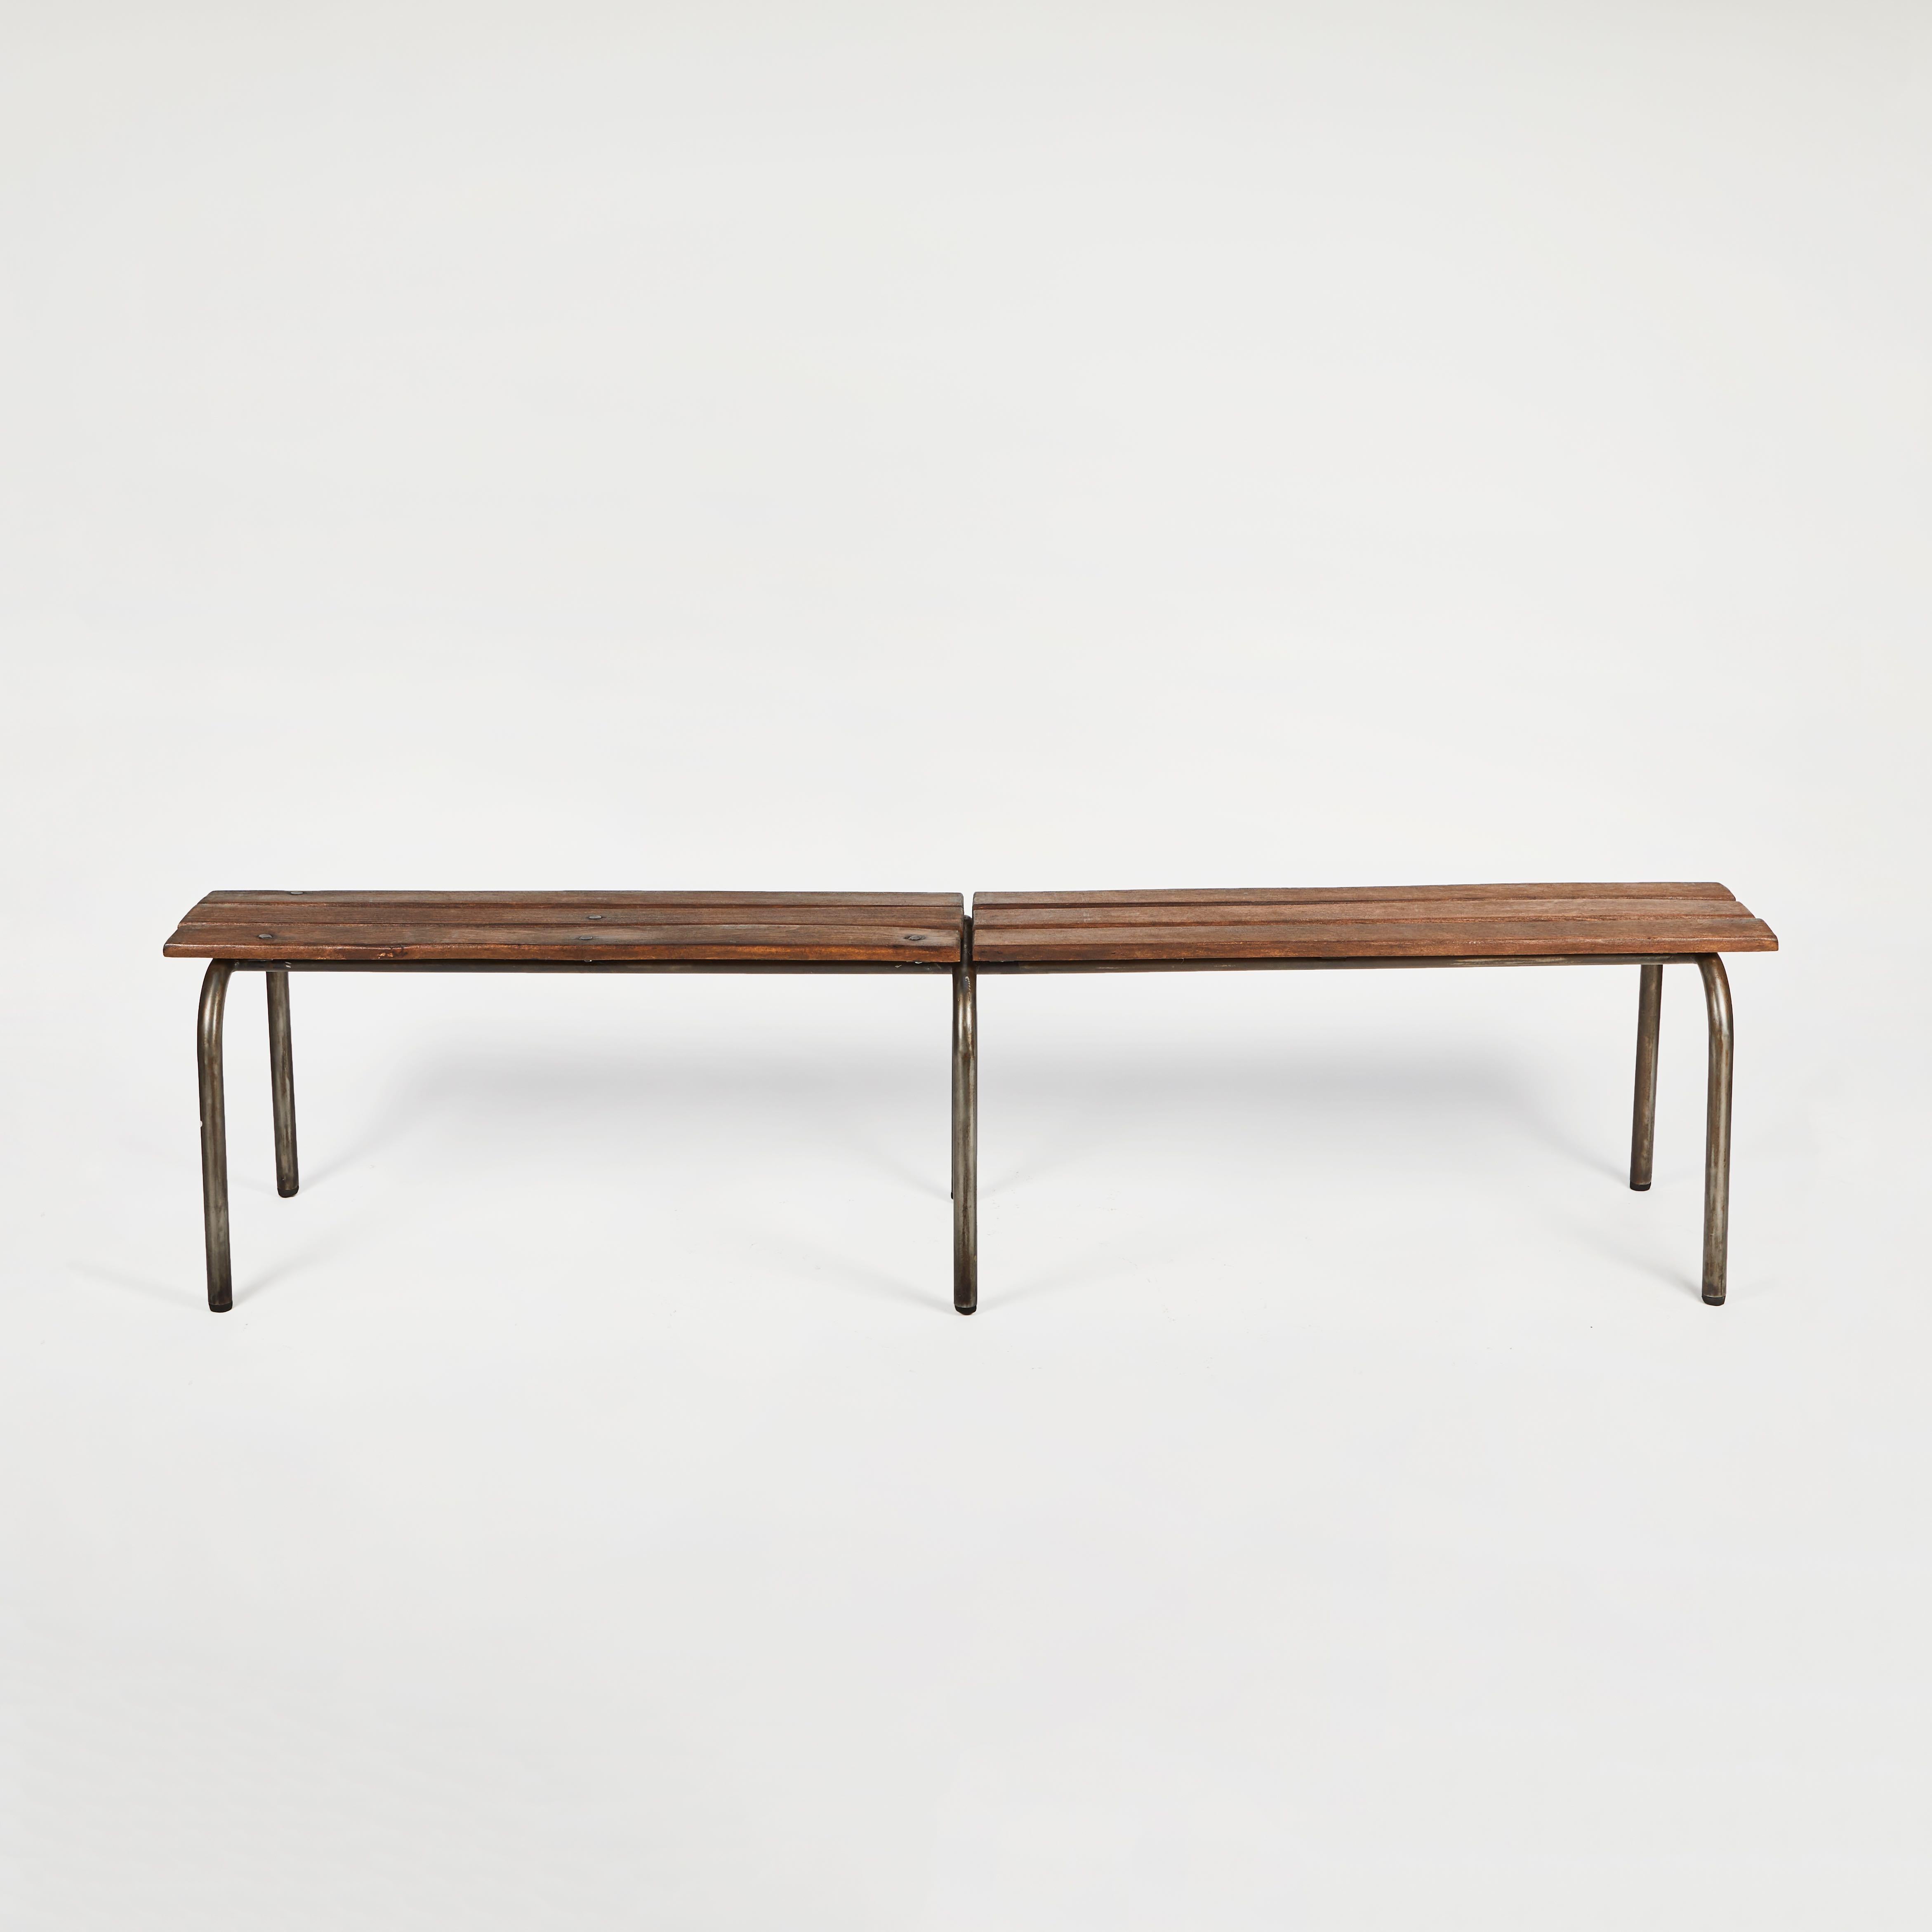 Early 20th-century French modernist metal and wood bench France. The seat is comprised of three tawny wood planks and is supported by three evenly spaced bent metal legs. Chic and industrial, the top appears to almost be floating in space.  Also